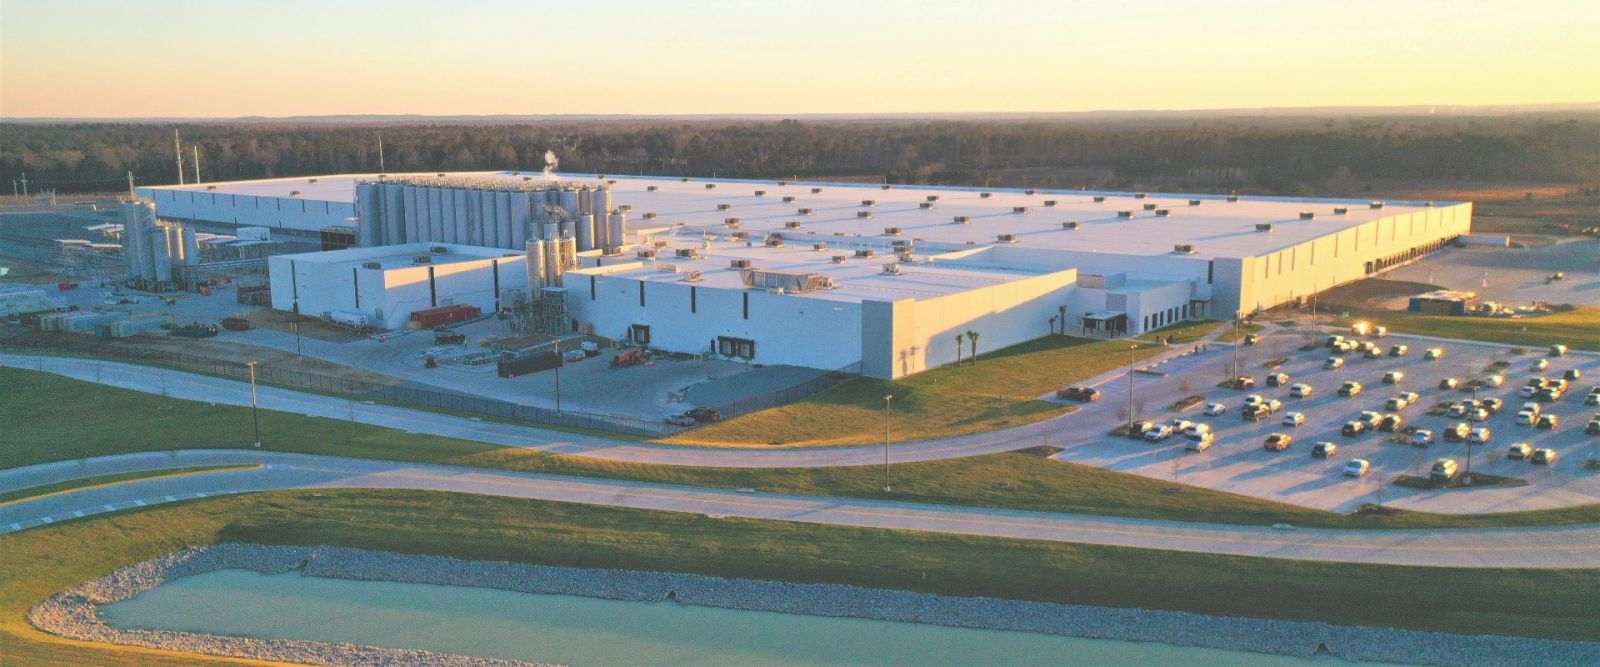 Mark Anthony Brewing's $400 million facility in Richland County made up the bulk of the county's record year of economic development in 2020 and created momentum leaders continue to build on. (Photo/Mark Anthony Brewing)